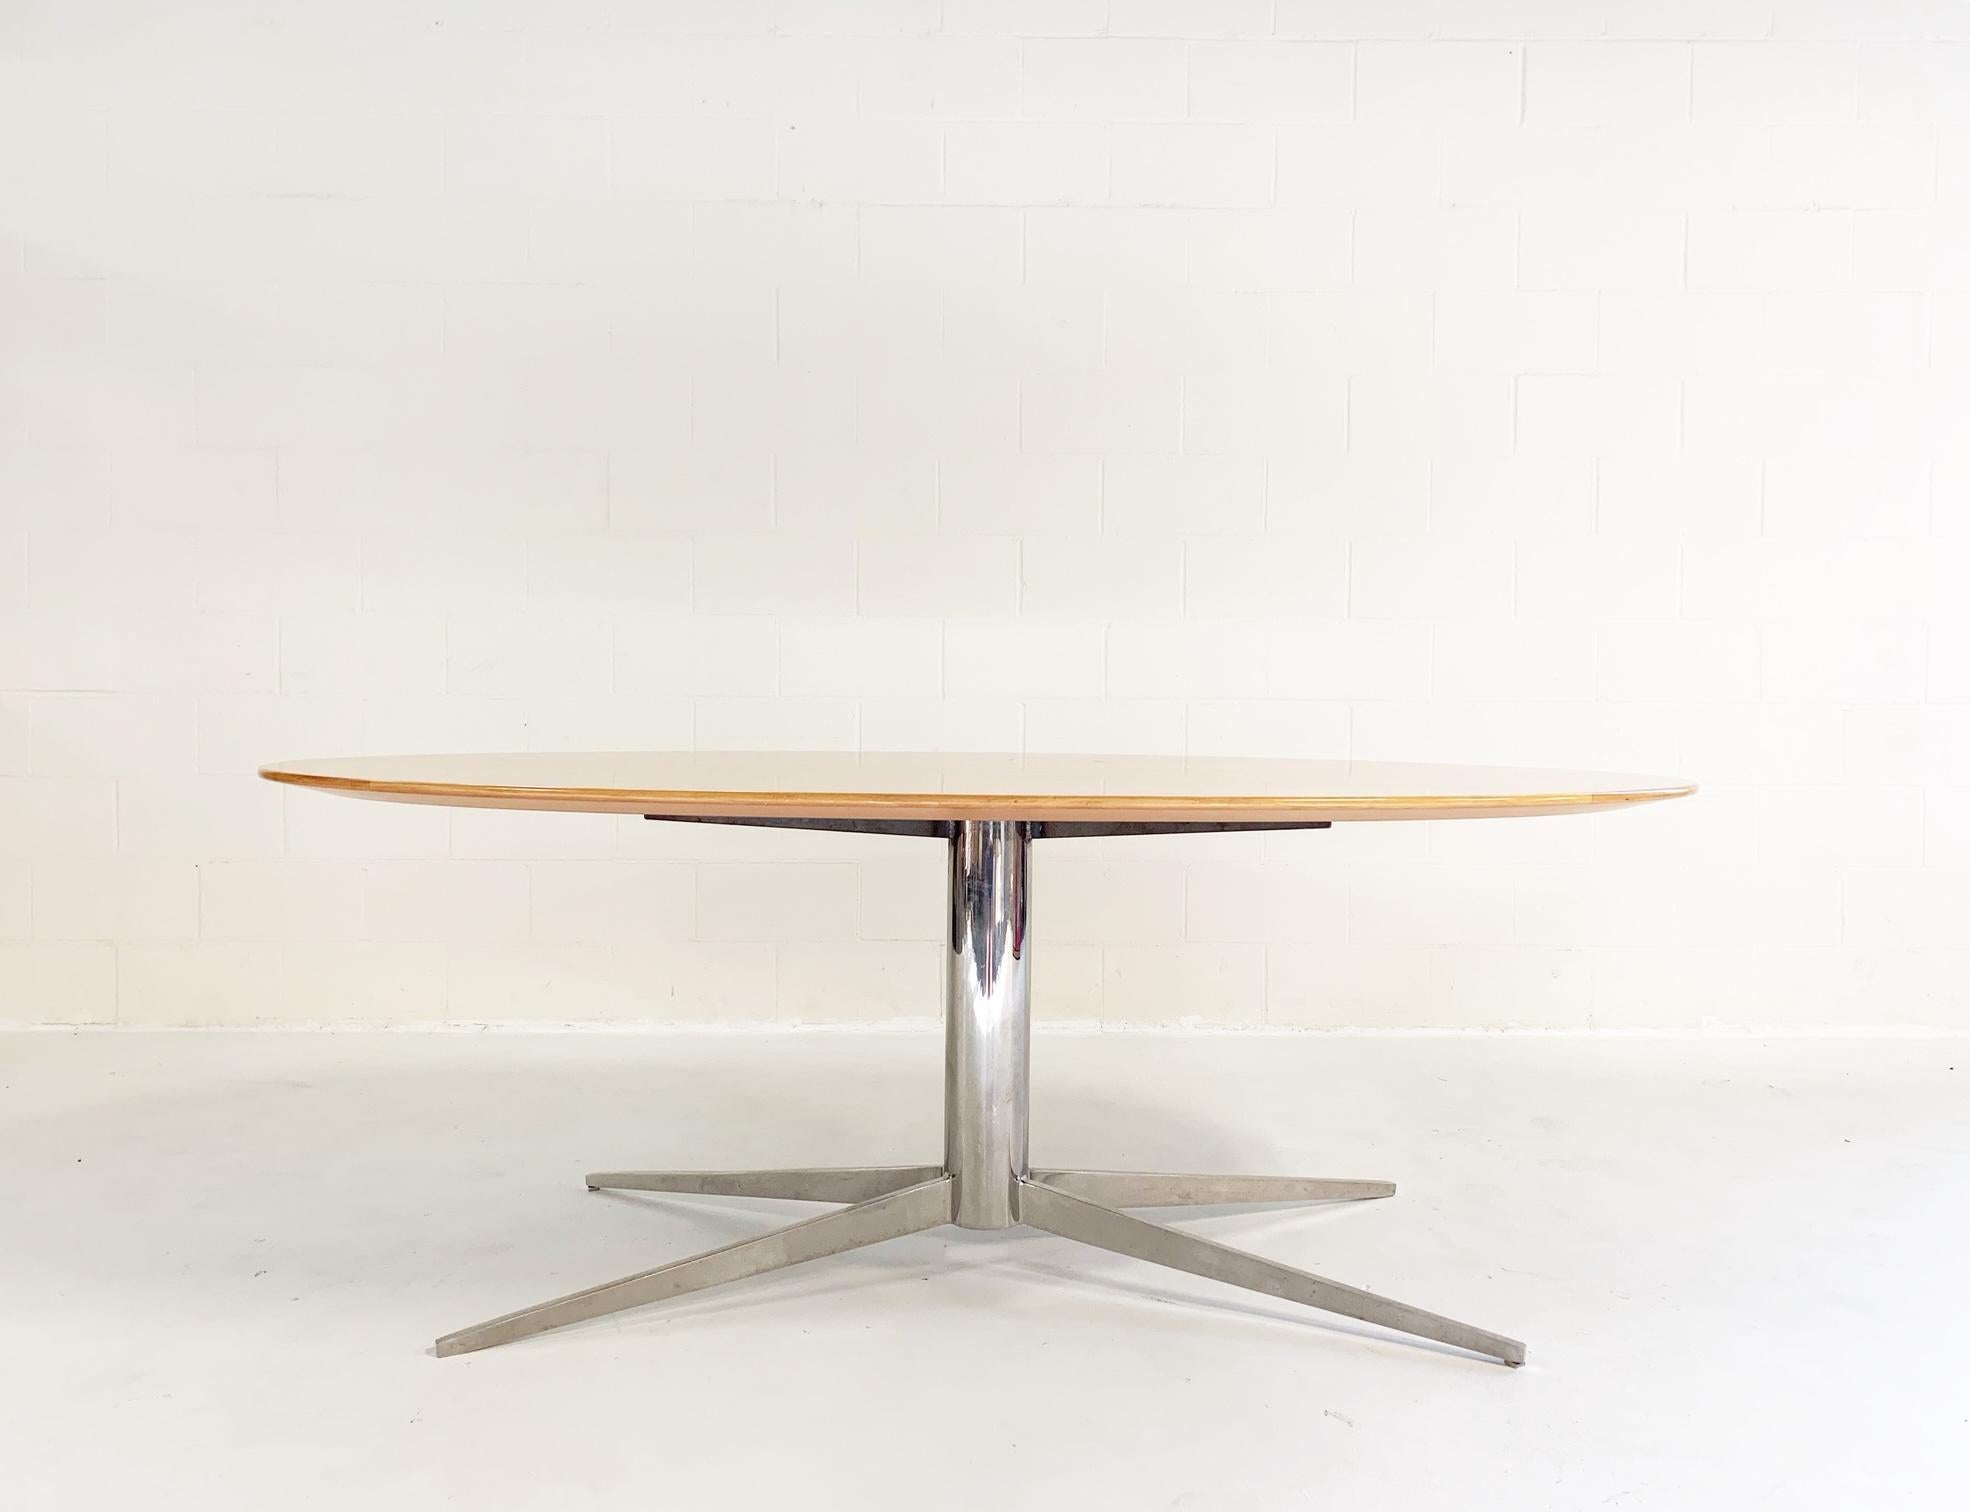 From the Knoll website Florence Knoll described her designs the fill-in pieces which had to be provided. 